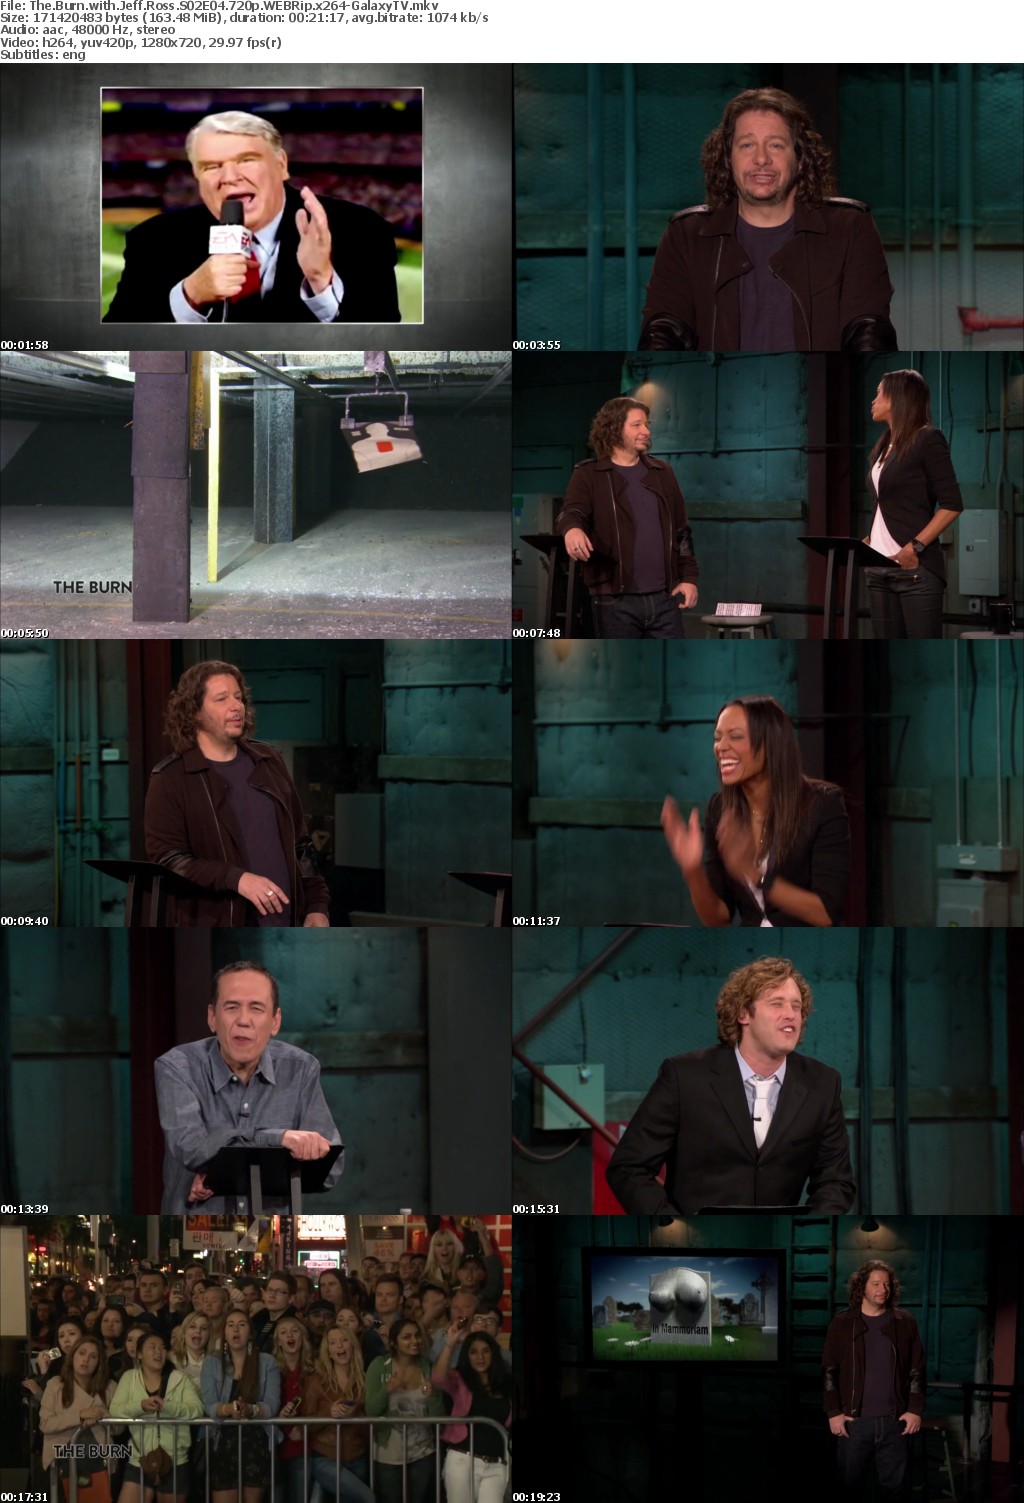 The Burn with Jeff Ross S02 COMPLETE 720p WEBRip x264-GalaxyTV